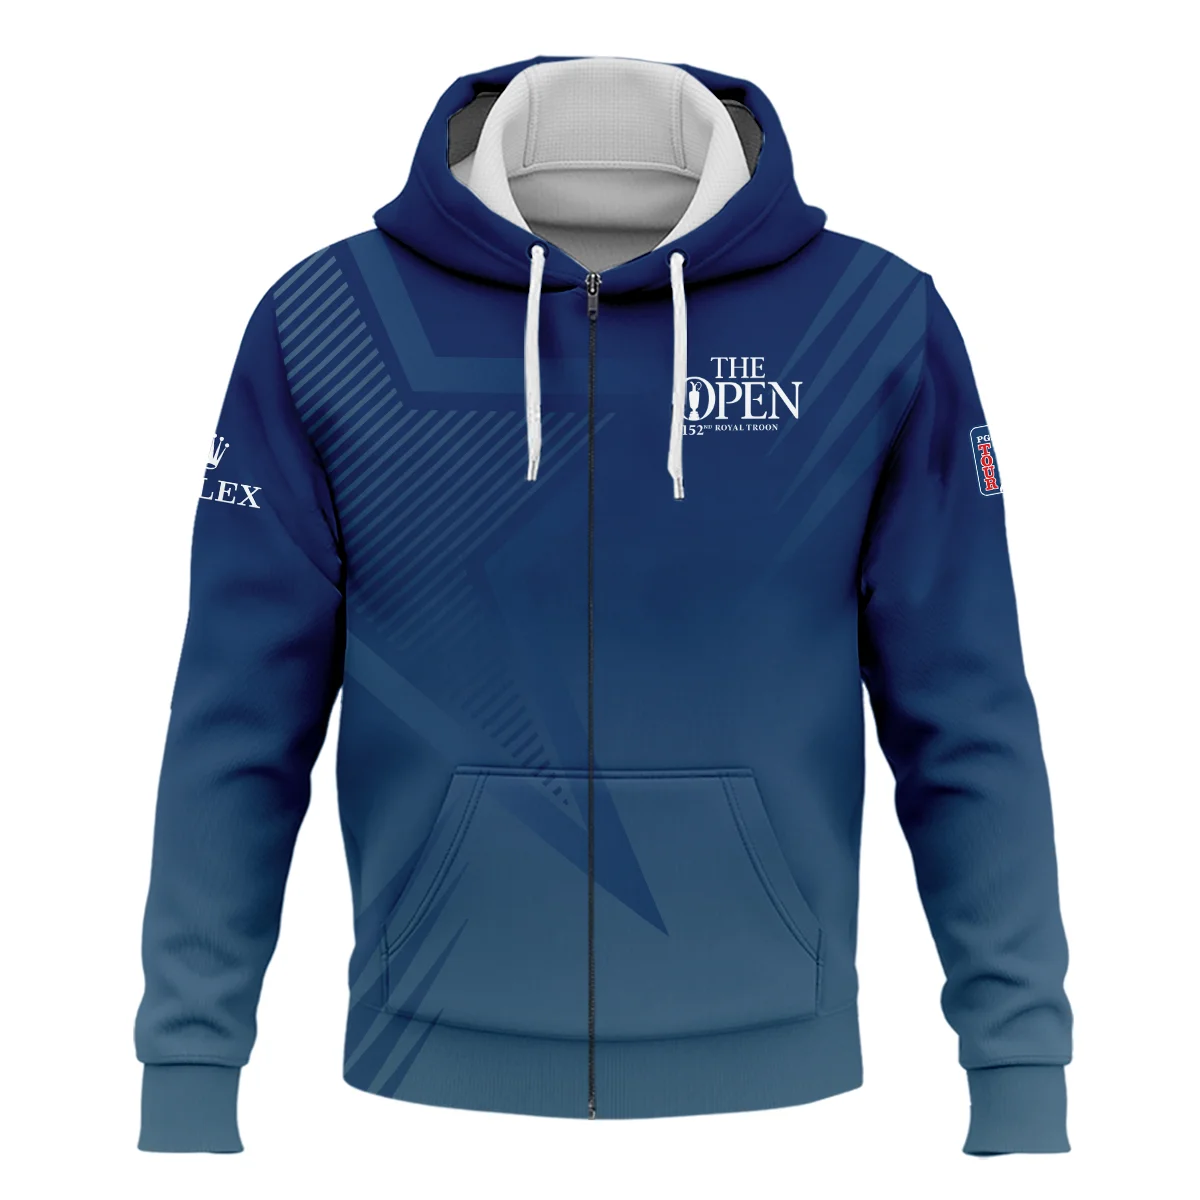 Rolex 152nd Open Championship Abstract Background Dark Blue Gradient Star Line Quarter-Zip Jacket All Over Prints HOTOP260624A04ROXSWZ